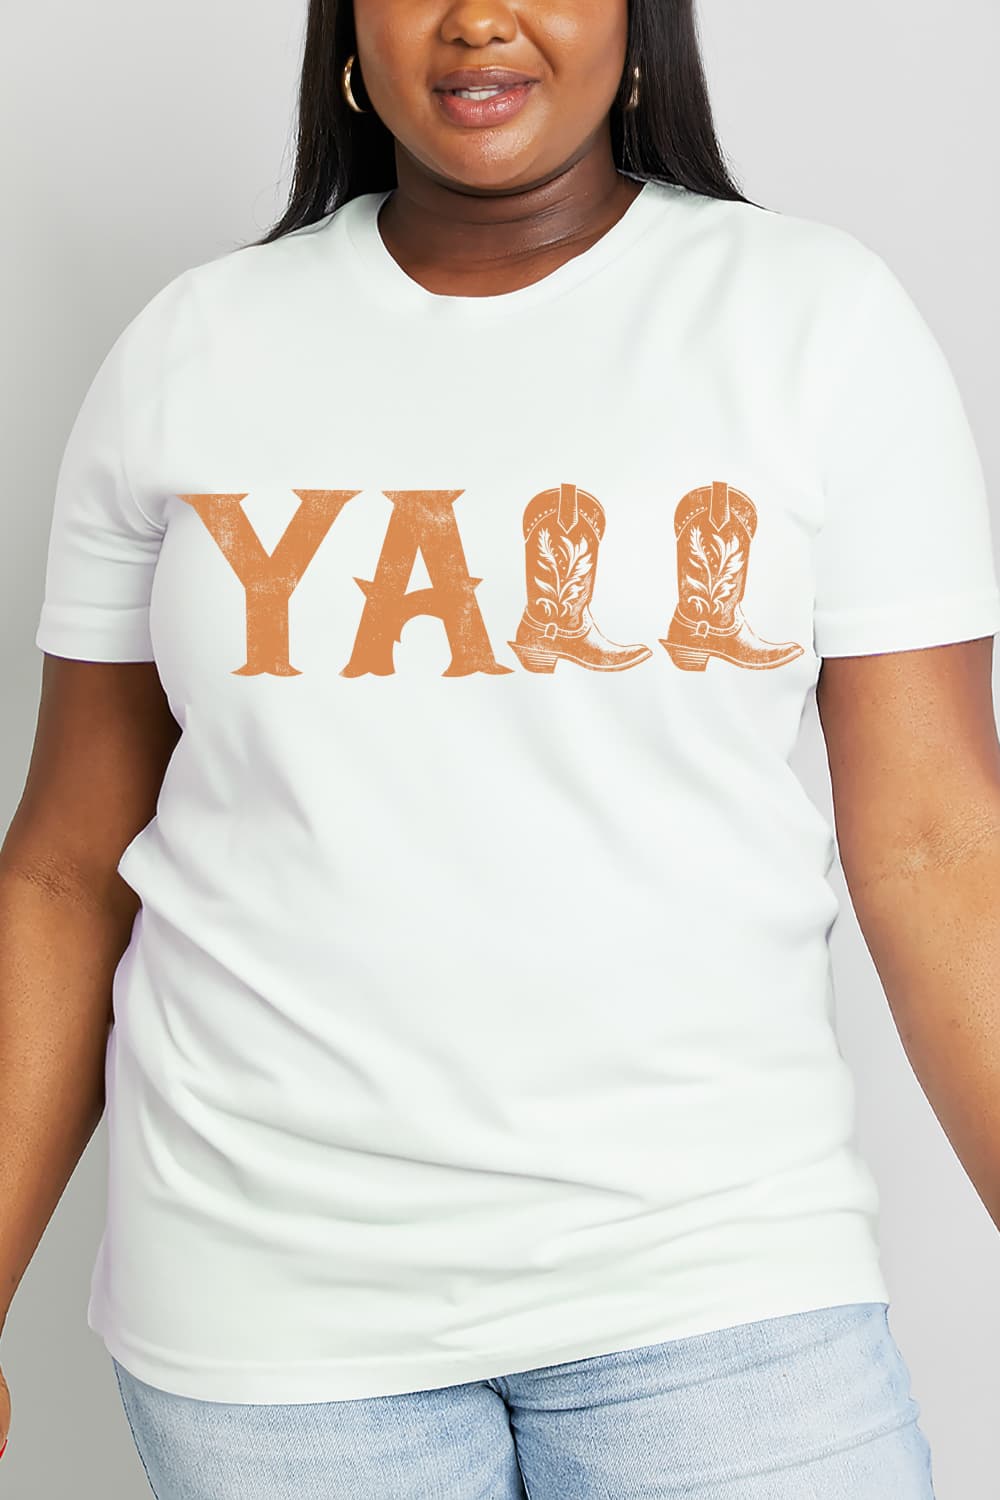 Women's Full Size YALL Graphic Cotton Tee